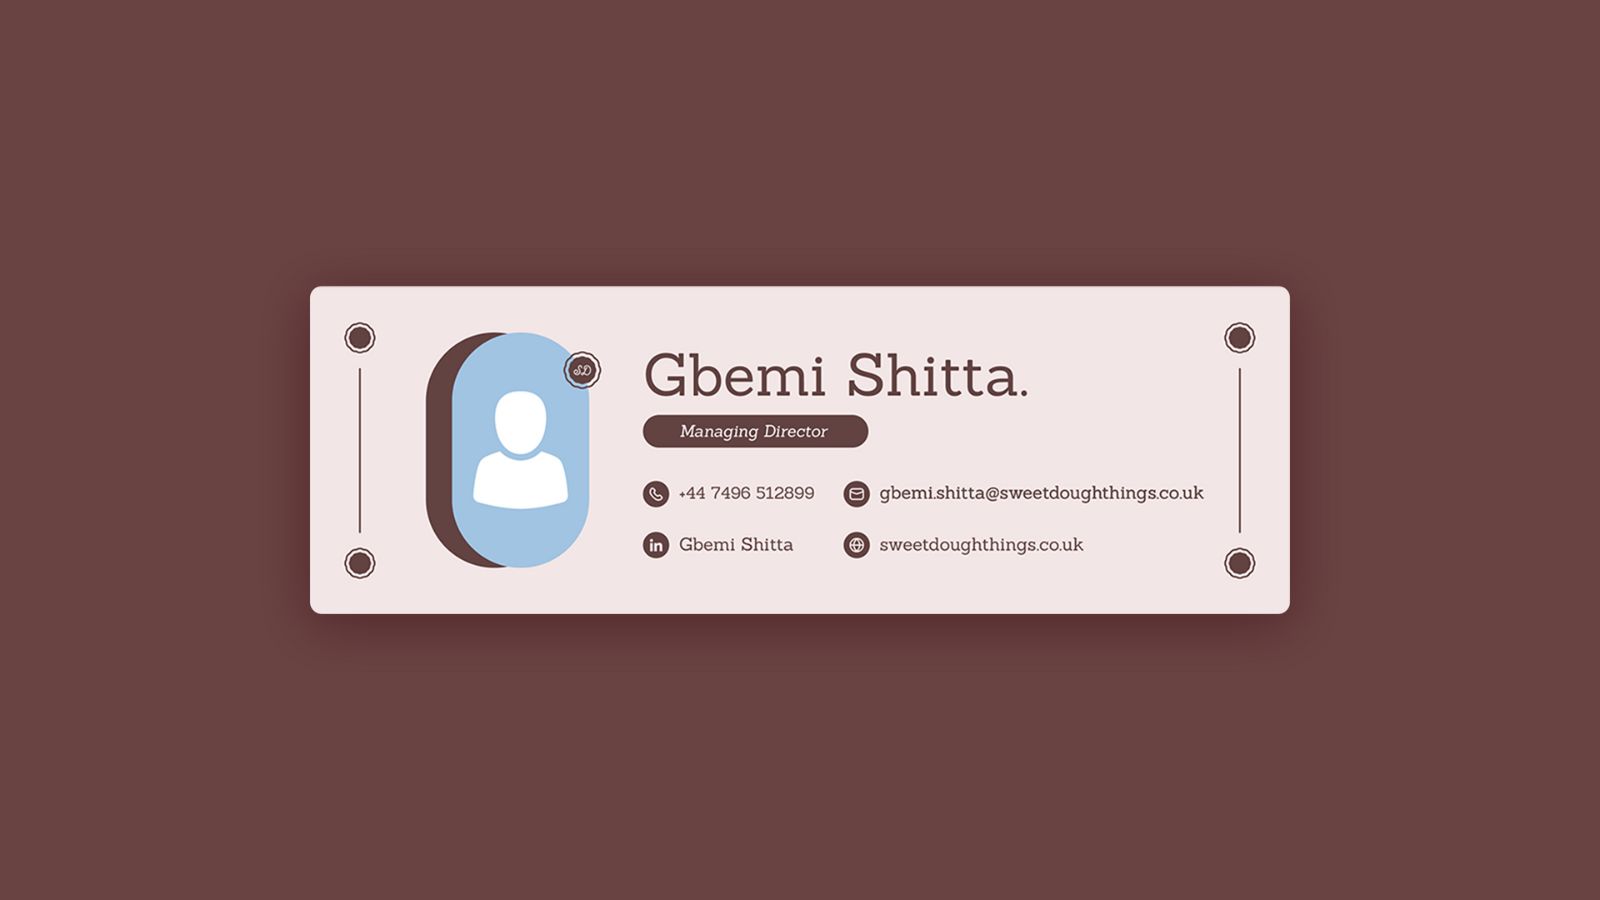 Gbemi Shitta business card for sweetdoughthings